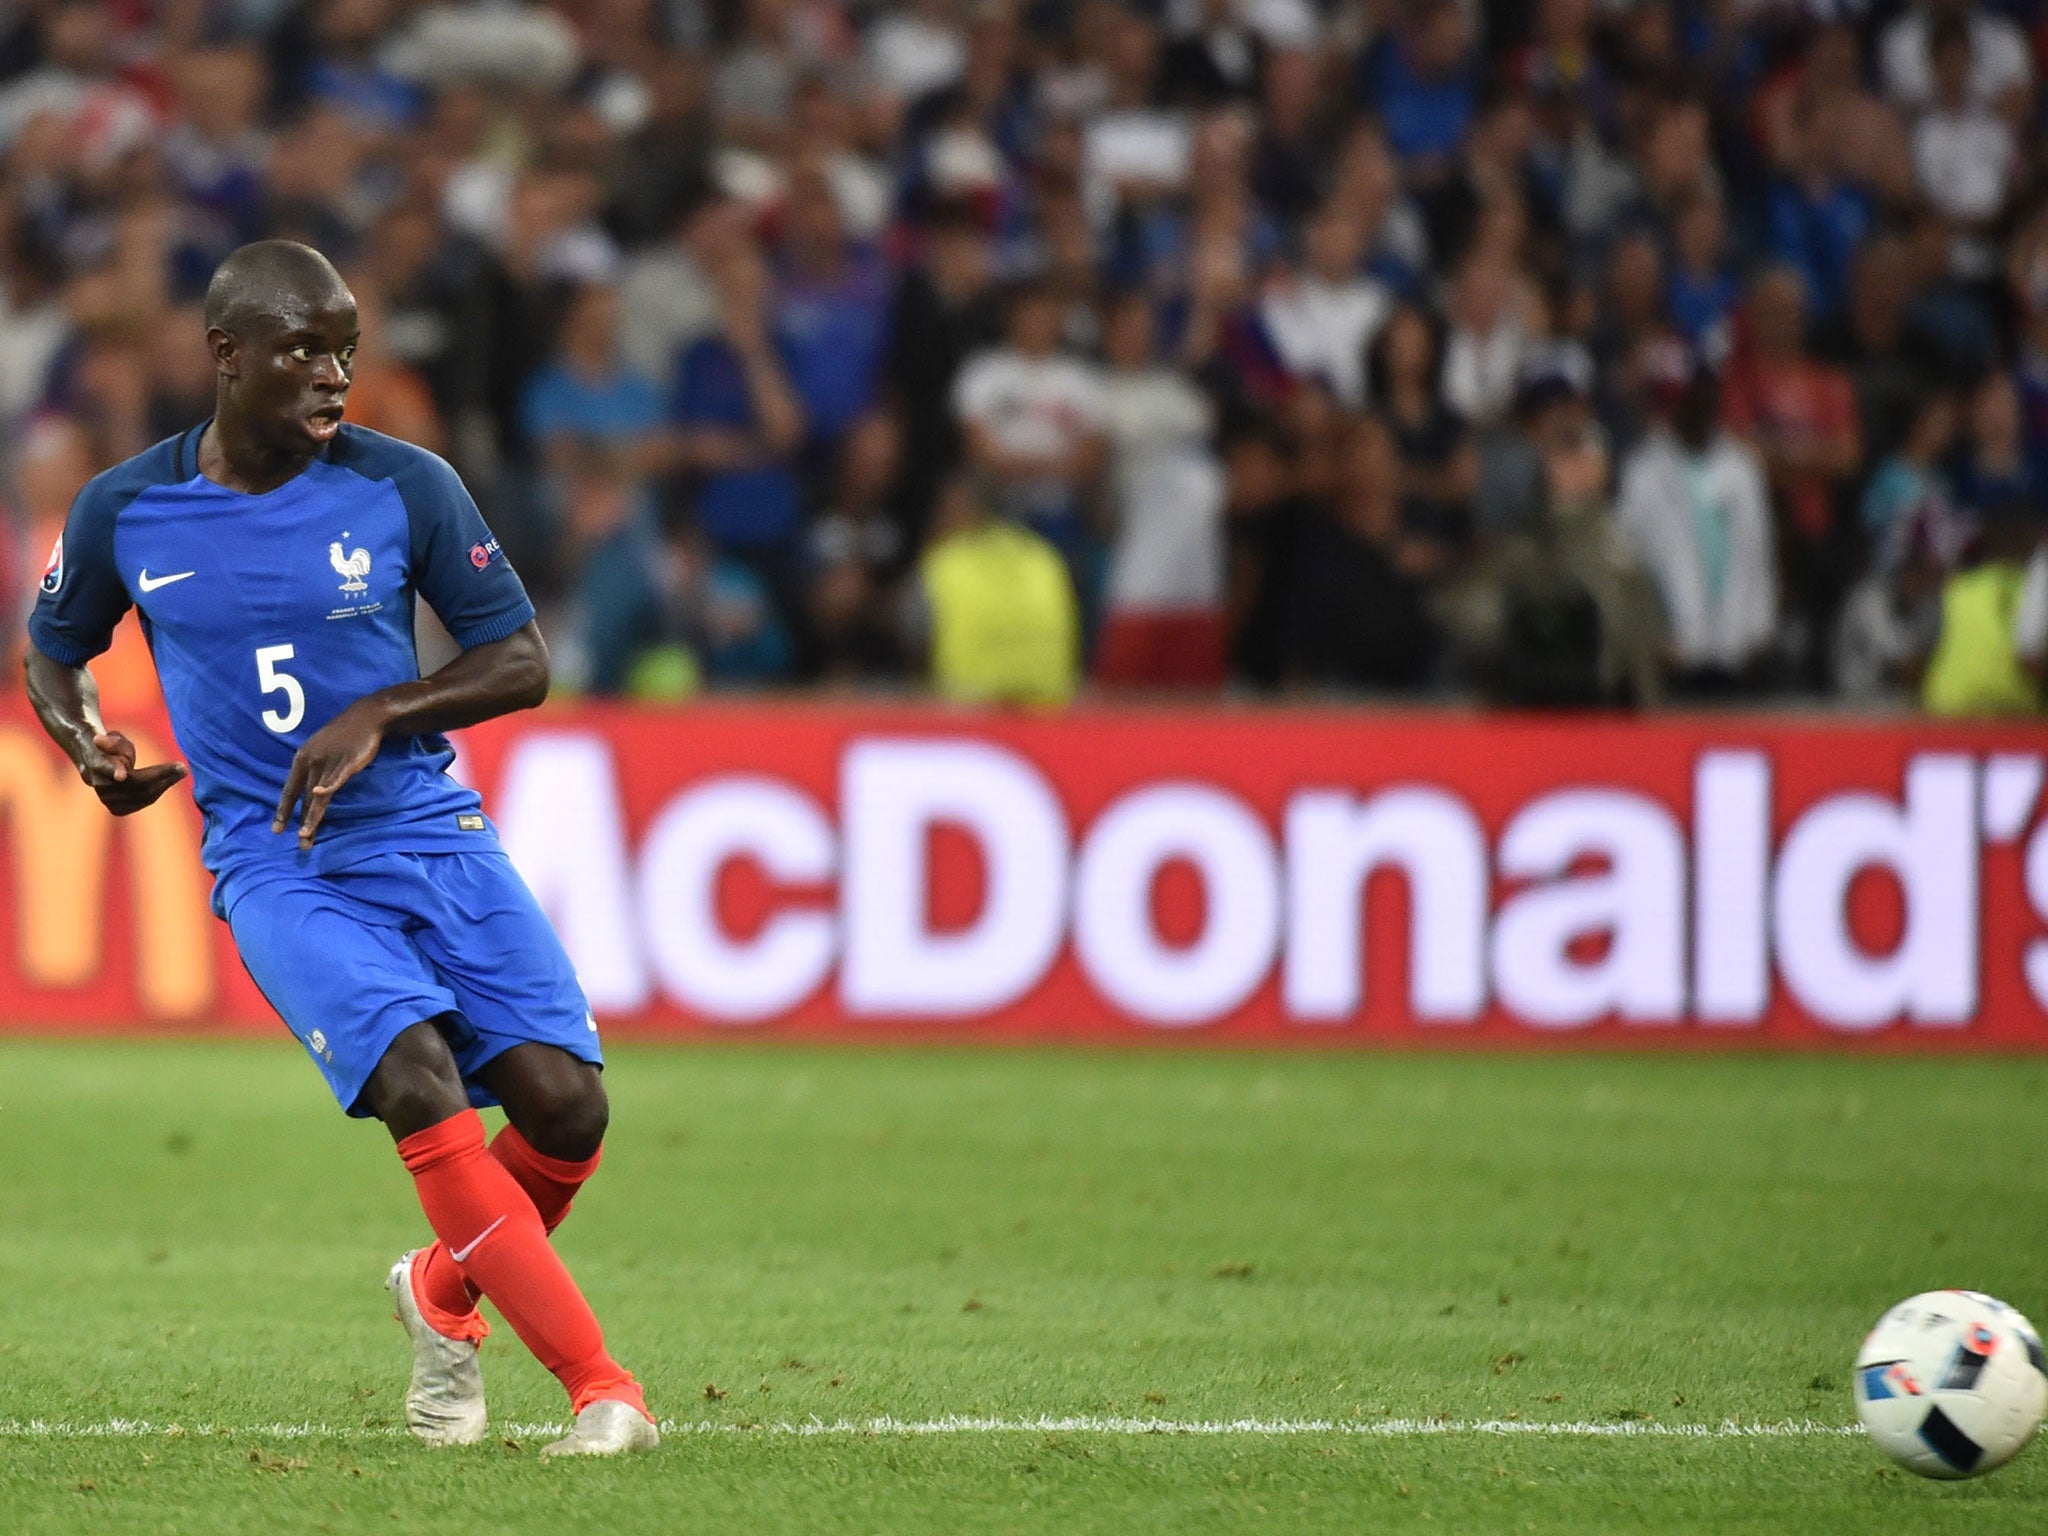 Kante starred in France's Euro 2016 campaign